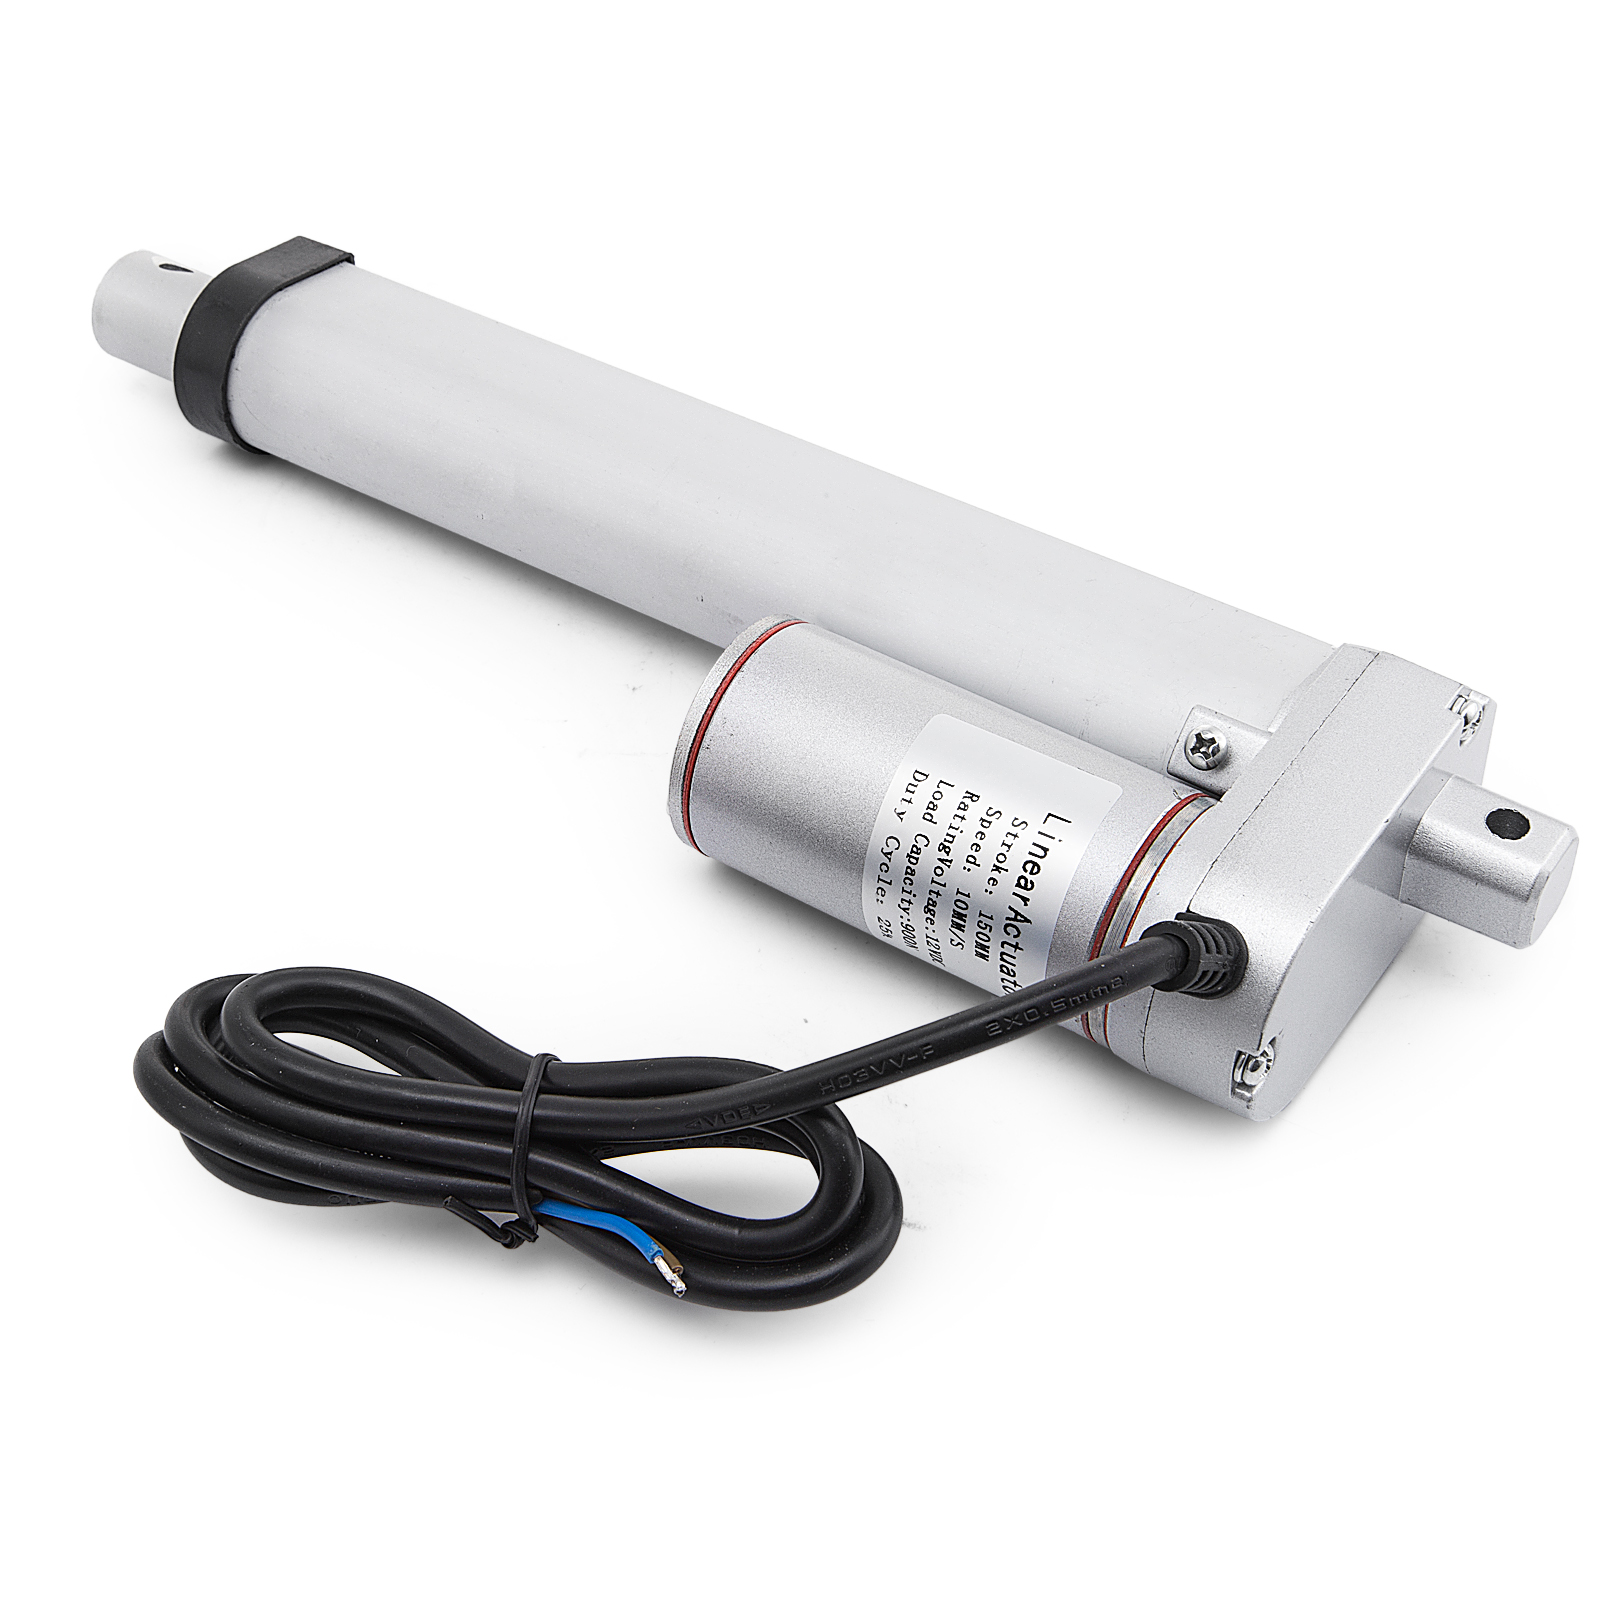 6" Inch Stroke Linear Actuator 900N/225lbs Pound Max Lift 12V Volt DC Motor NEW 